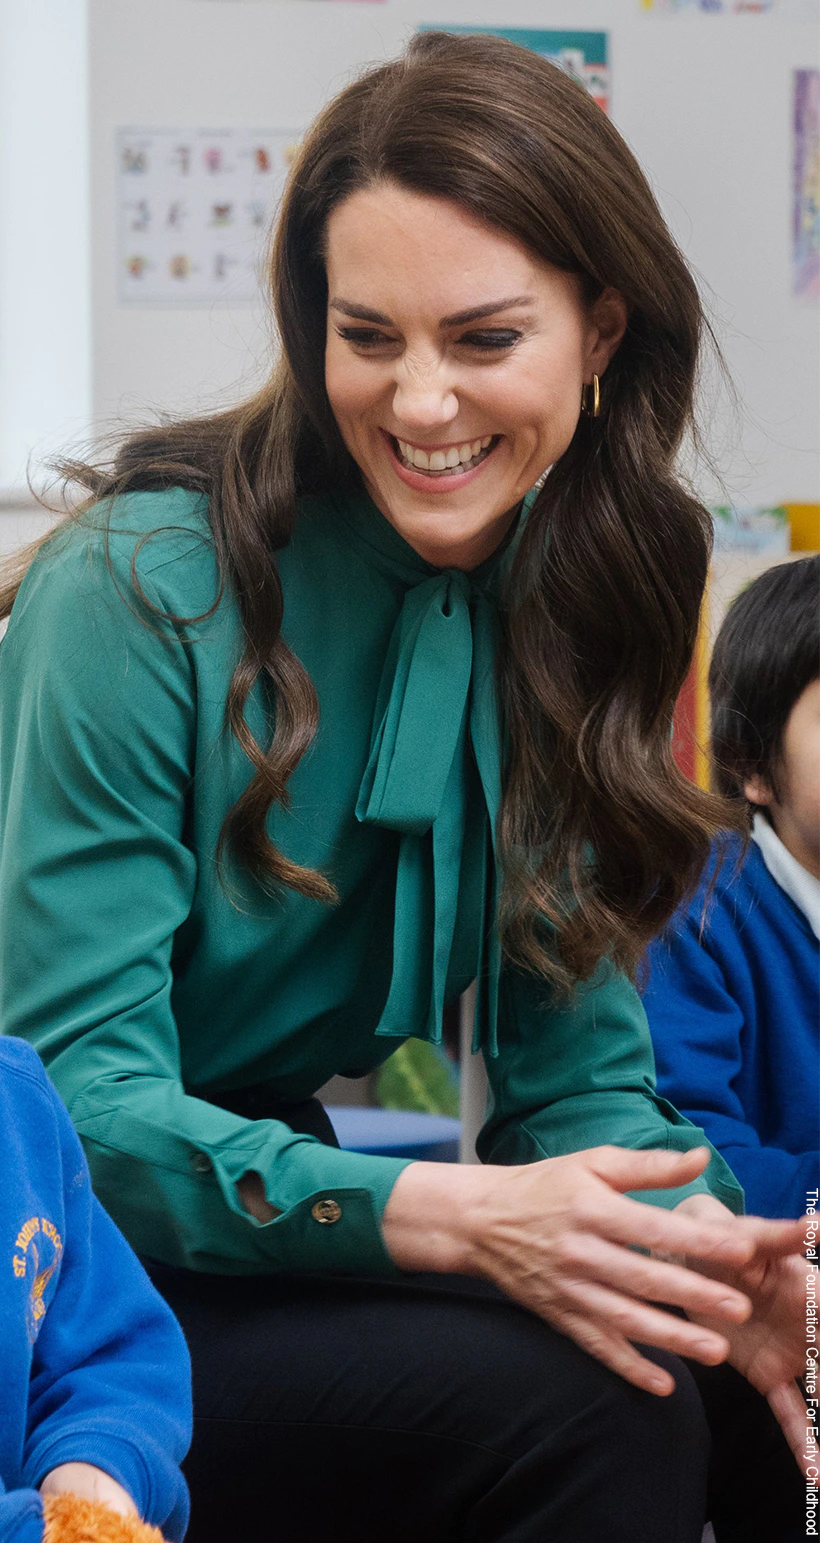 Kate Middleton wears bold green pussybow blouse in new 'Shaping Us' video  as she chats to schoolchildren about feelings and emotions